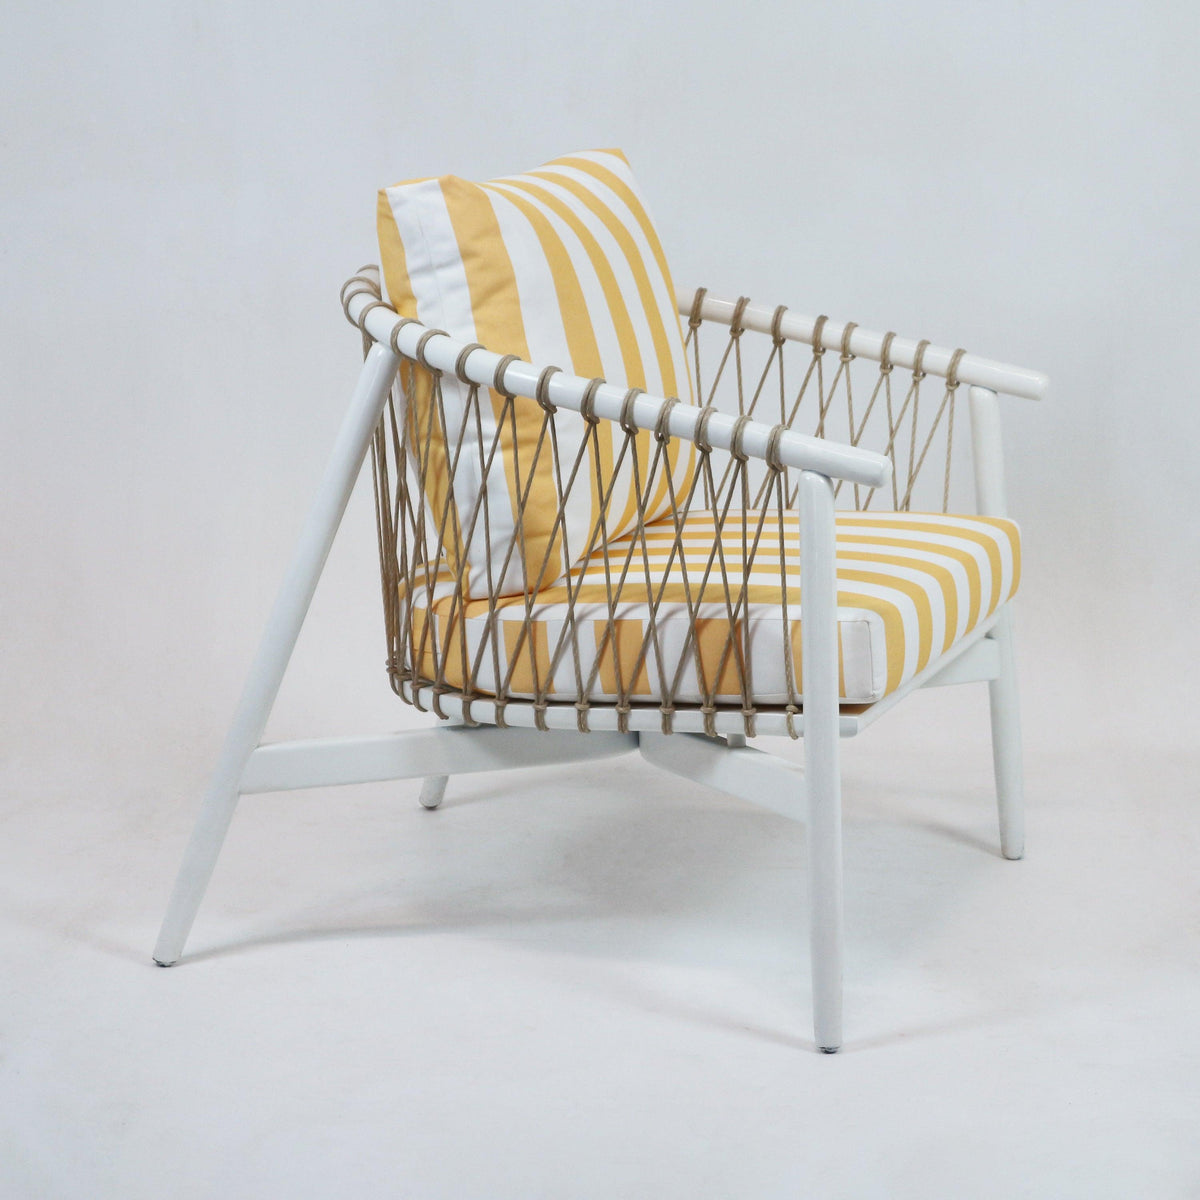 Mevcali Lounge Chair with Summer Stripe Upholstery - INTERIORTONIC